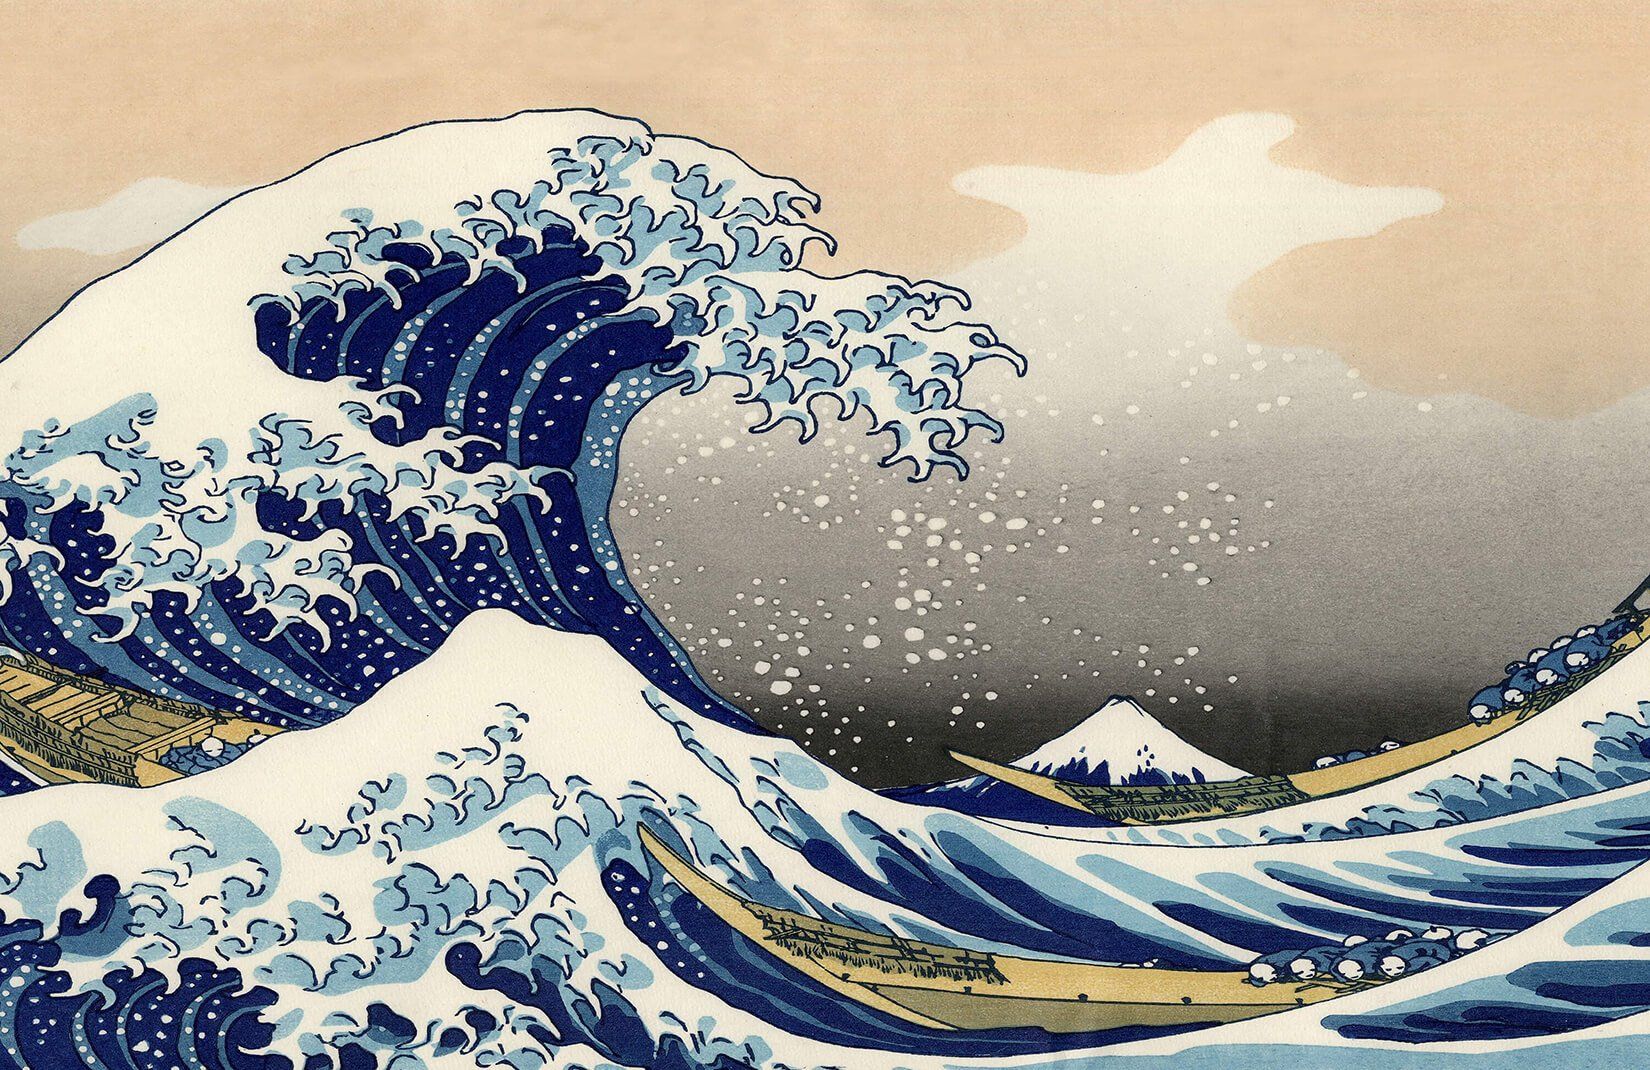 The Great Wave' by Hokusai Wallpaper Mural